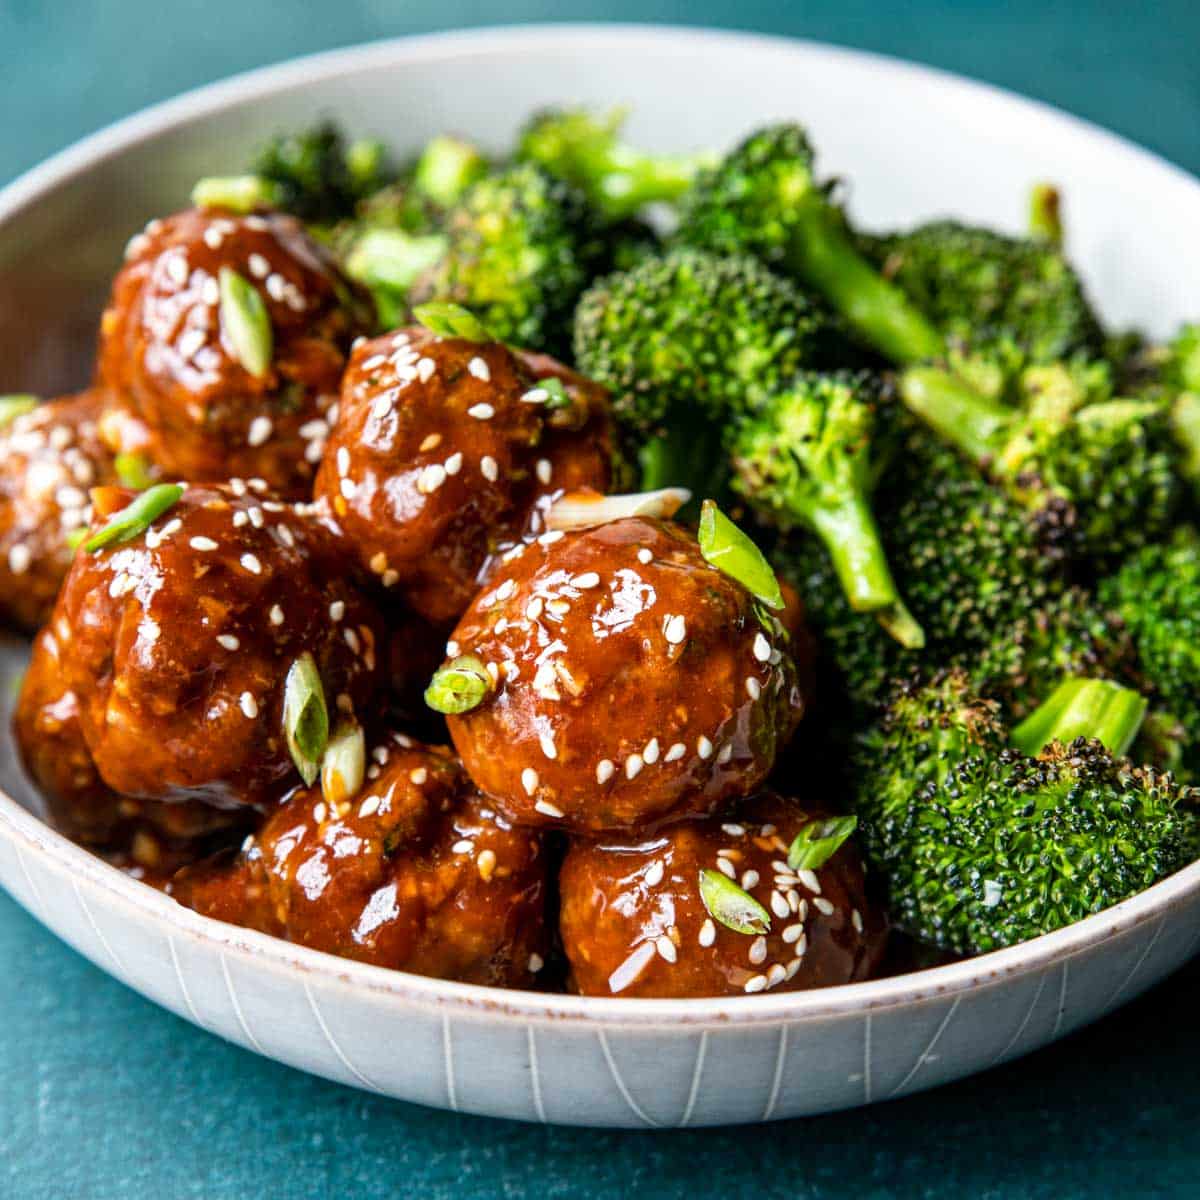 Saucy Hoisin Meatballs in a bowl with broccoli